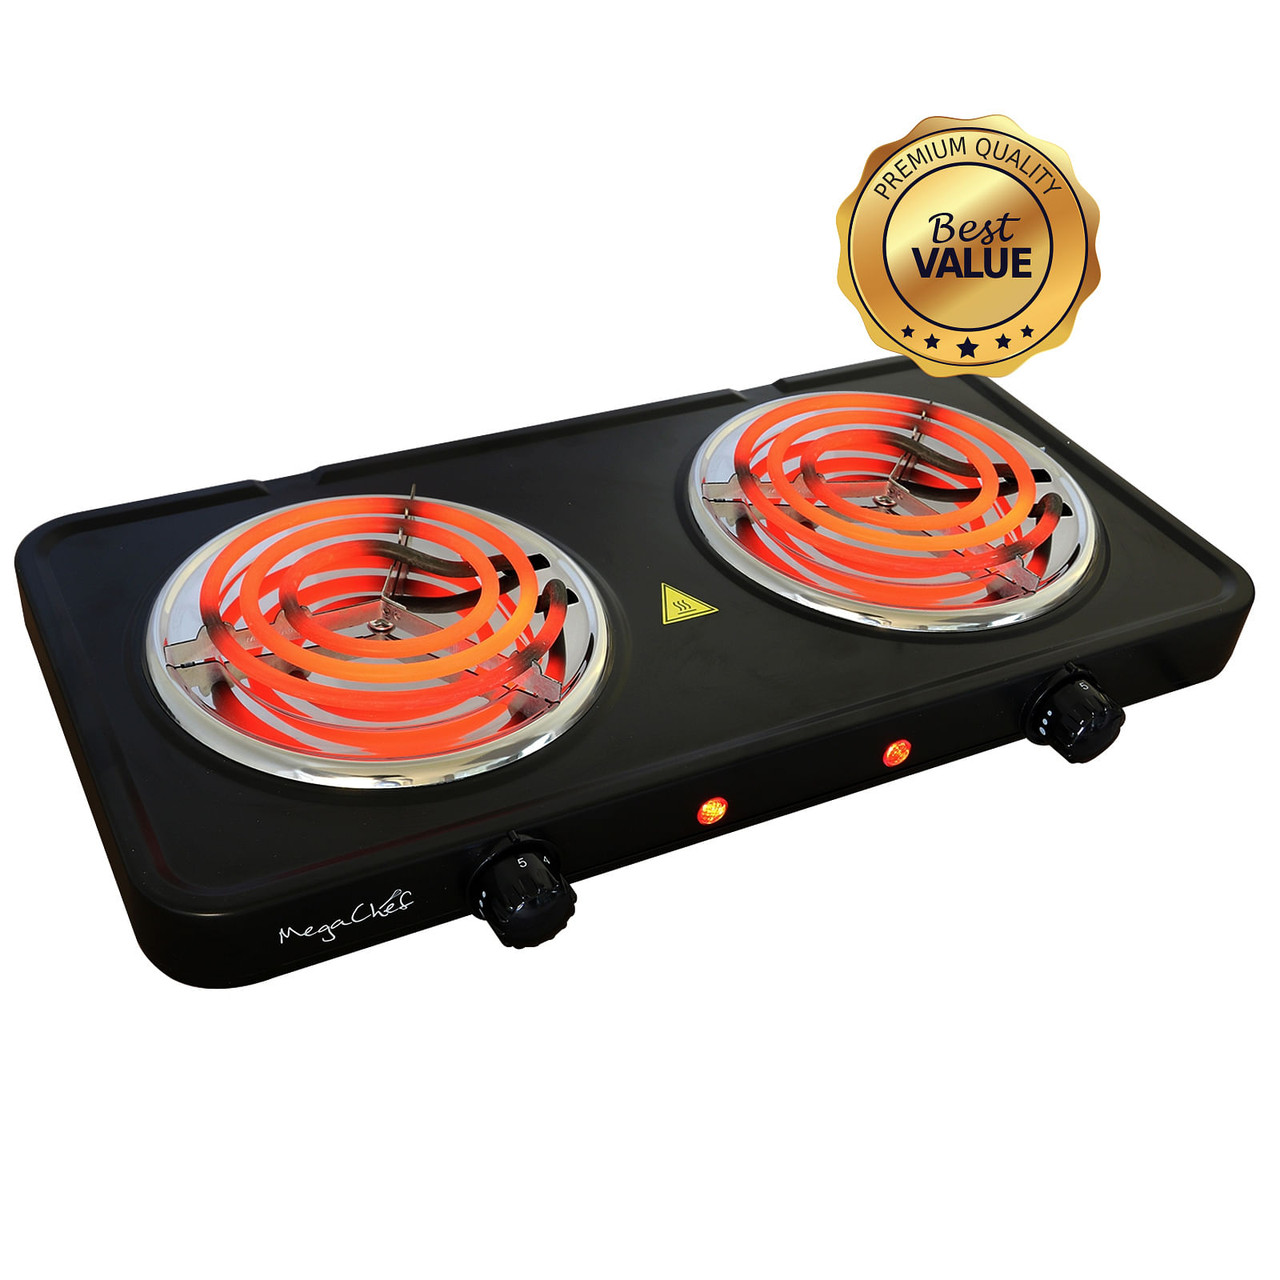 MegaChef Electric Easily Portable Ultra Lightweight Dual Coil Burner Cooktop Buffet Range in Matte 